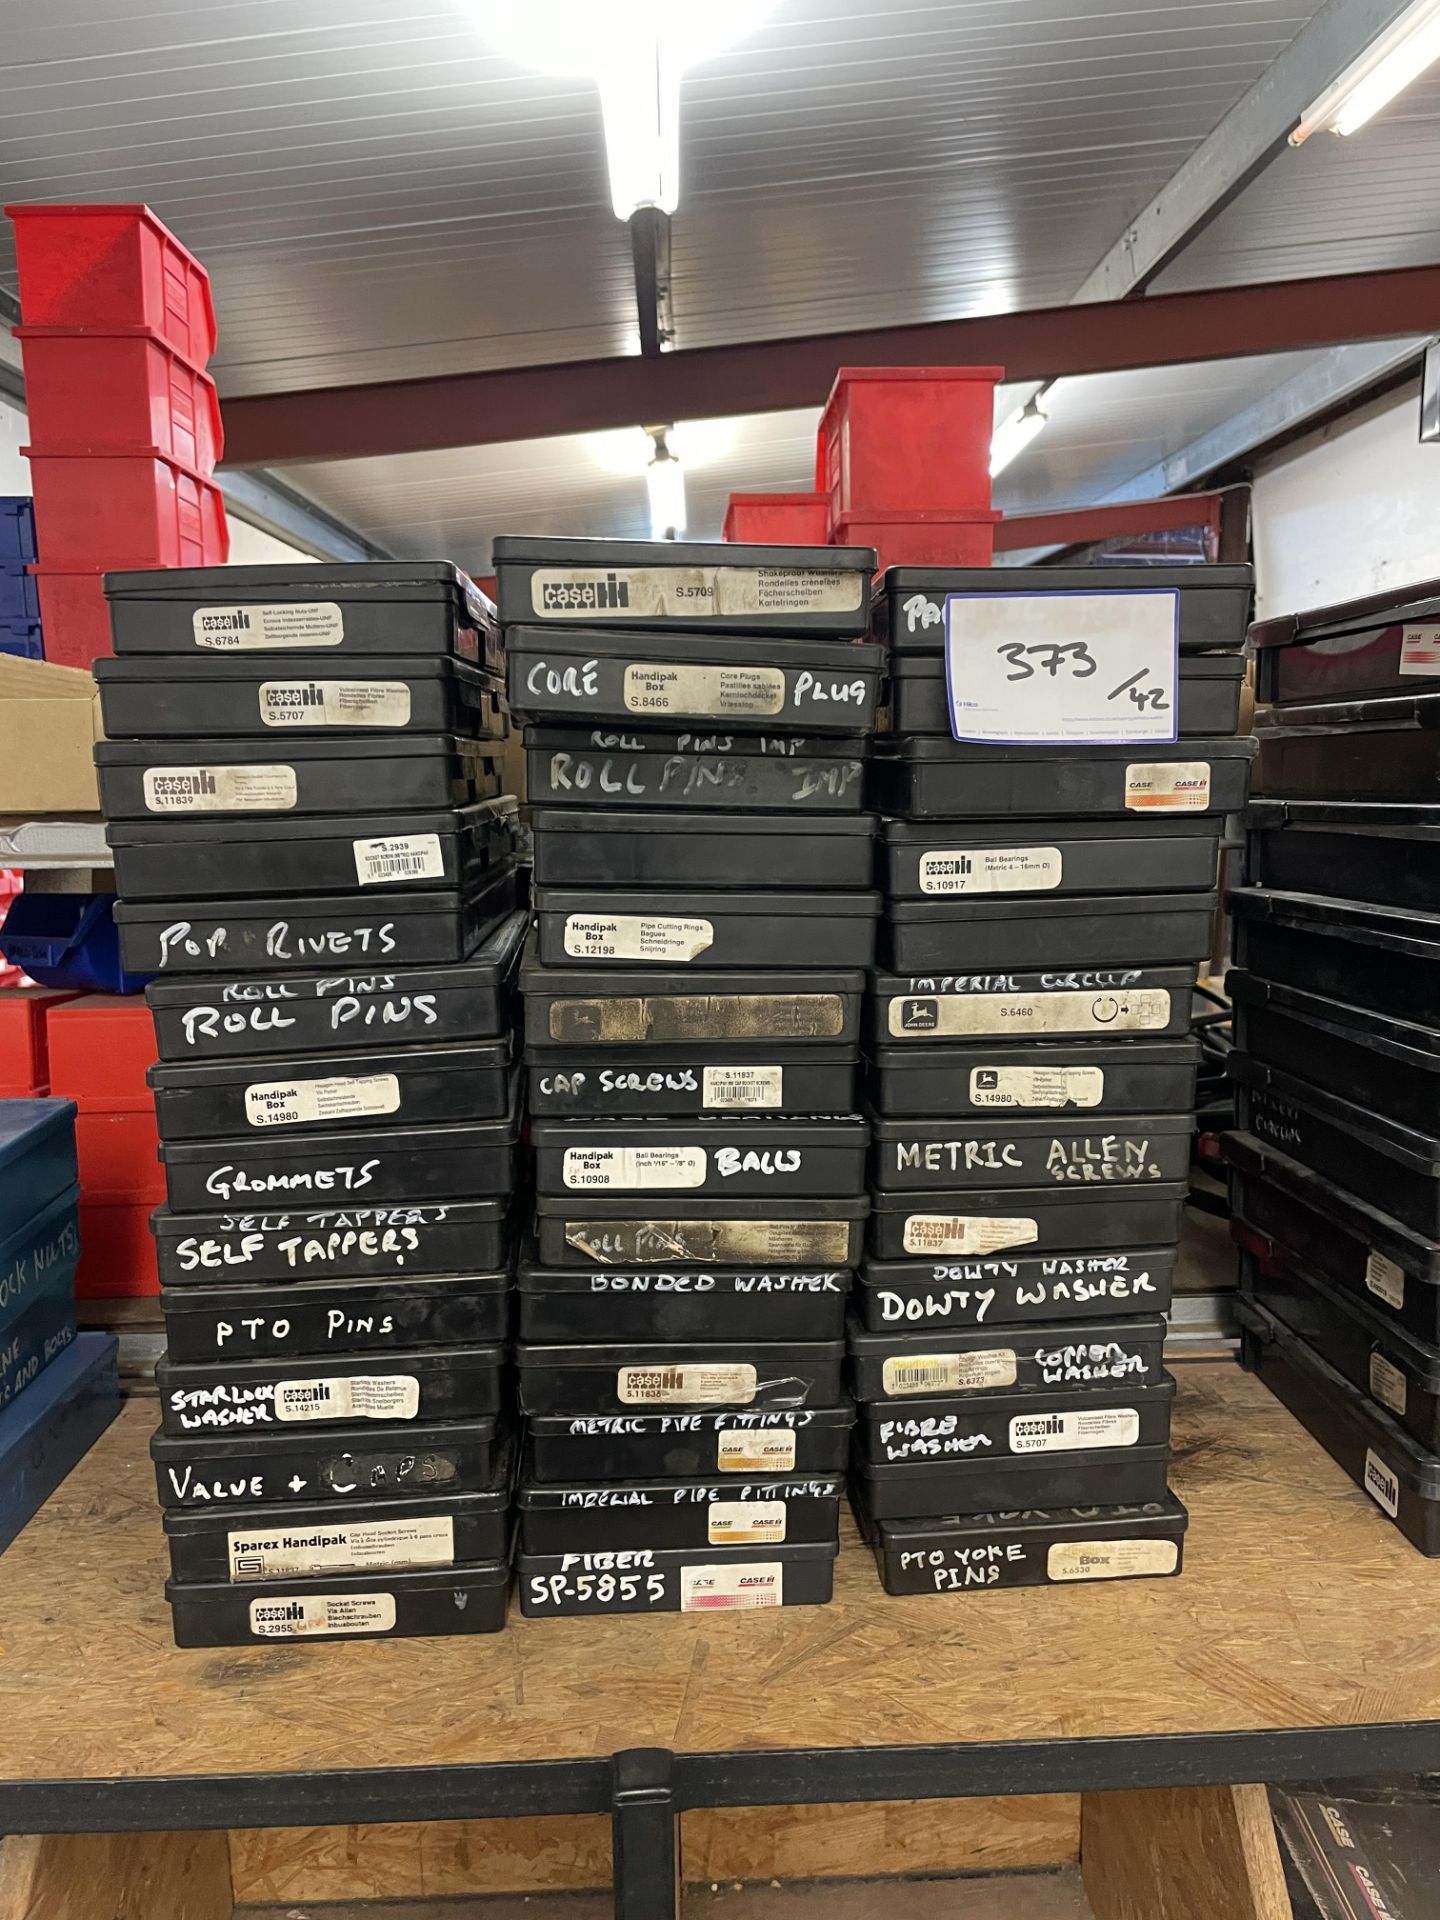 42: Boxes of Various Case Self Locking Nuts, Fibre Washers, Pop Rivets, Roll Pins, Grommets, PTO Pin